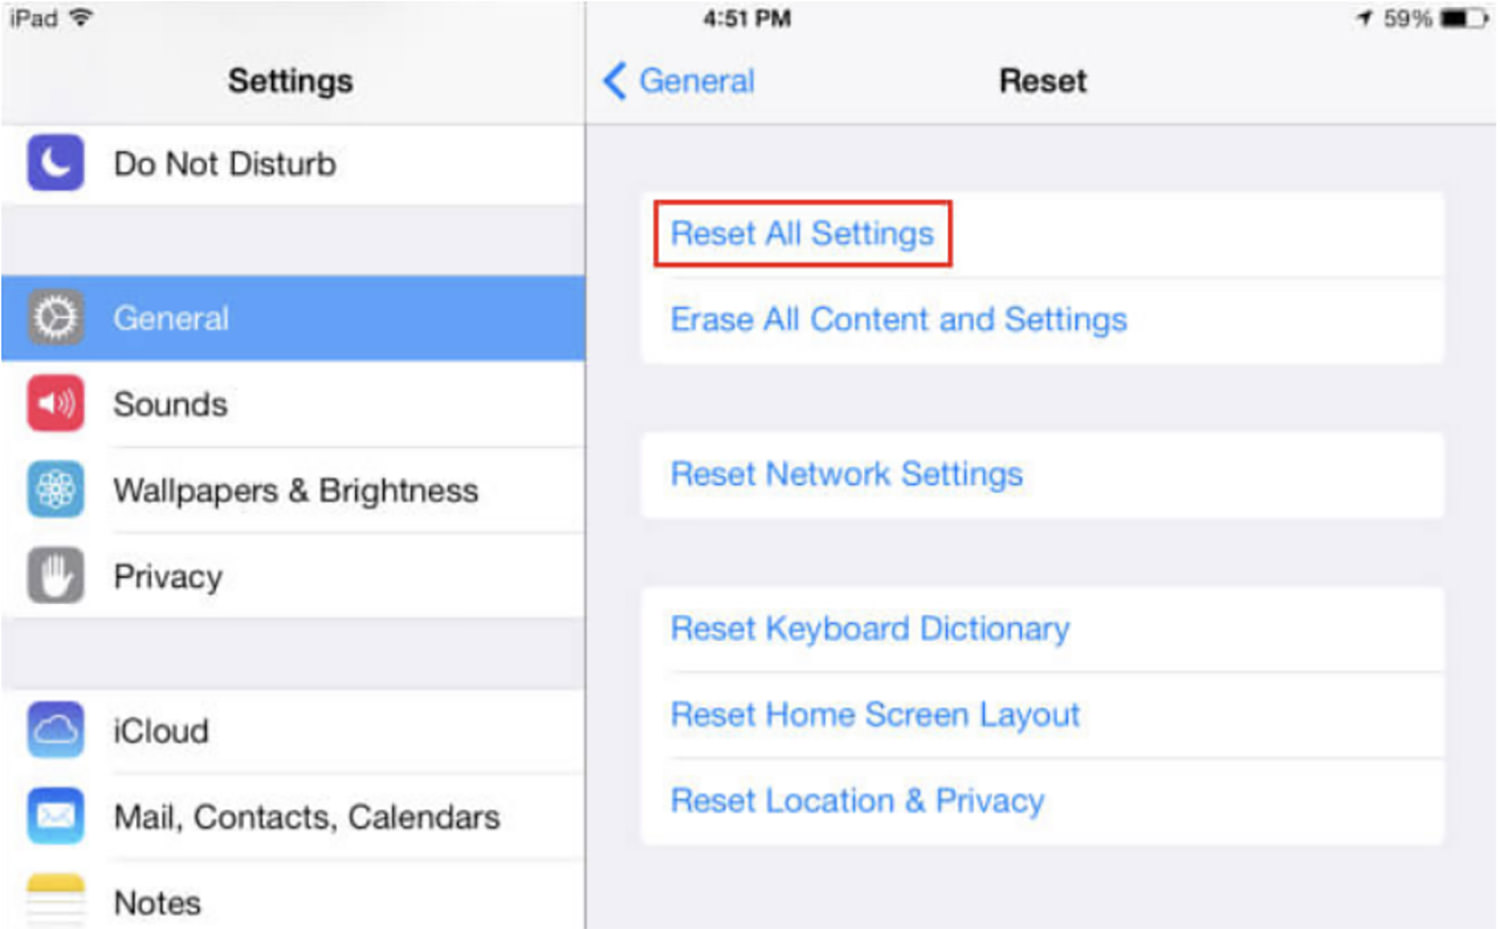 Guide on resetting all settings on an iPad